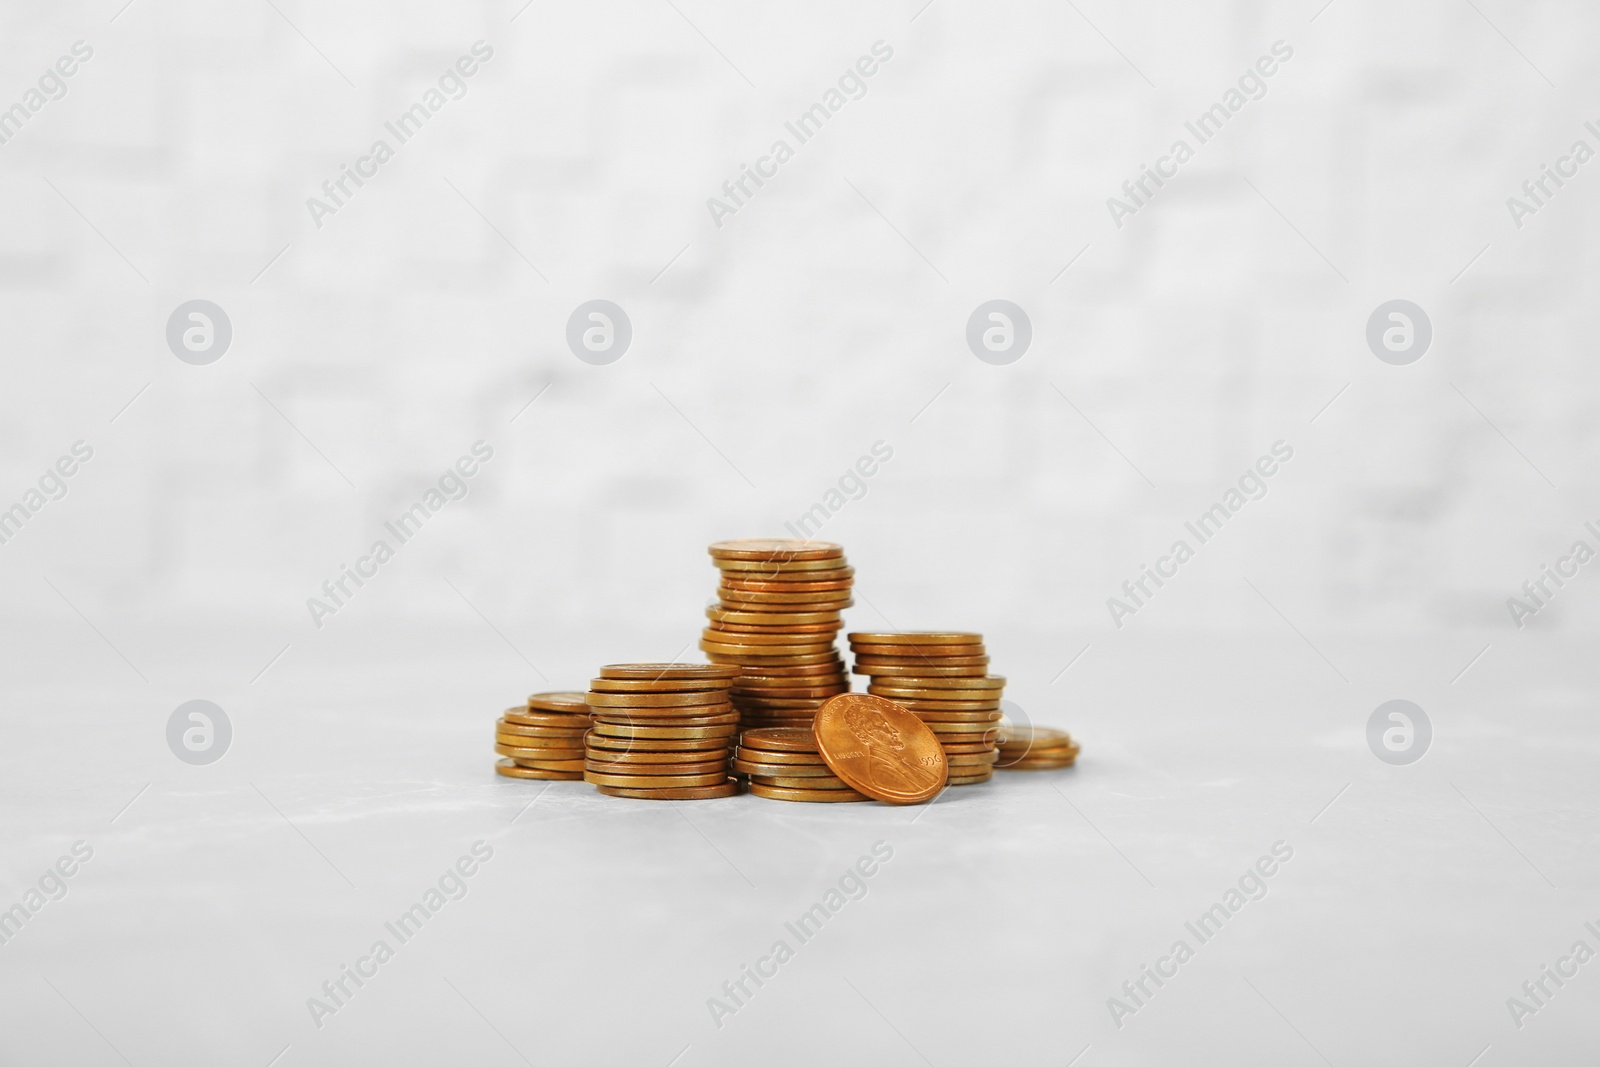 Photo of Many stacks of coins on table against light background